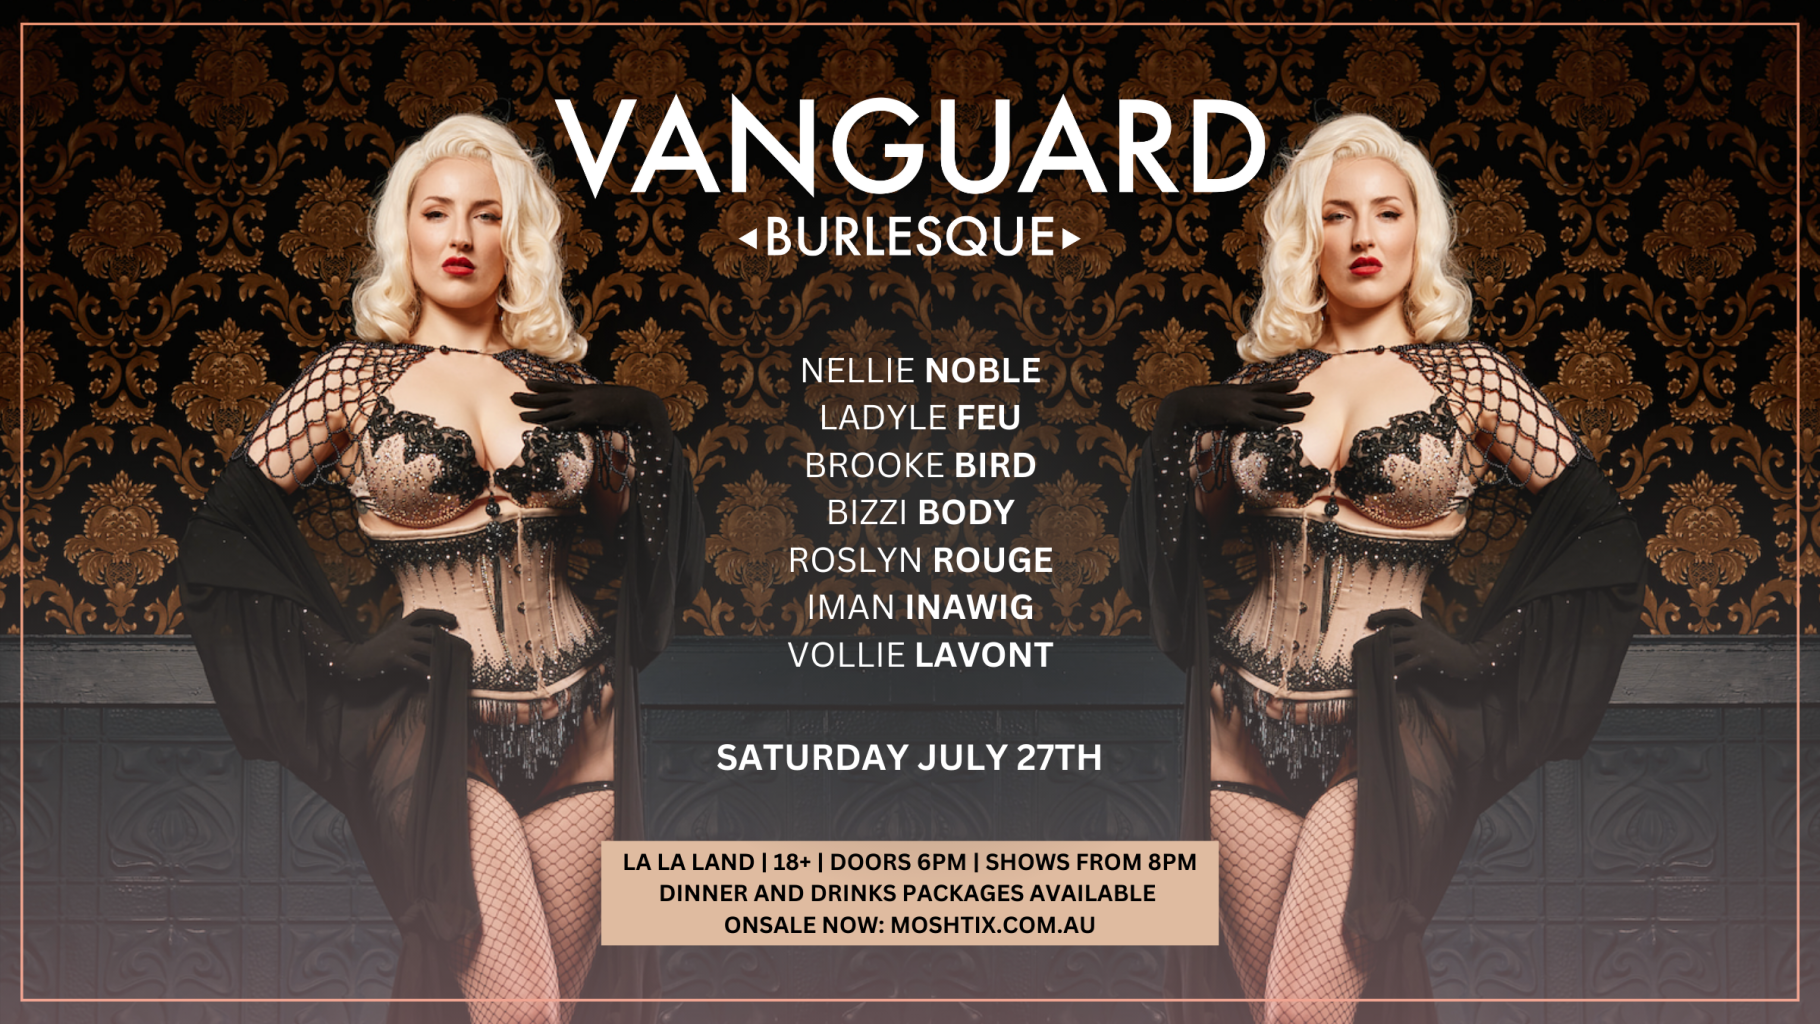 Vanguard Burlesque feat. Nellie Noble | Events at The Prince Consort